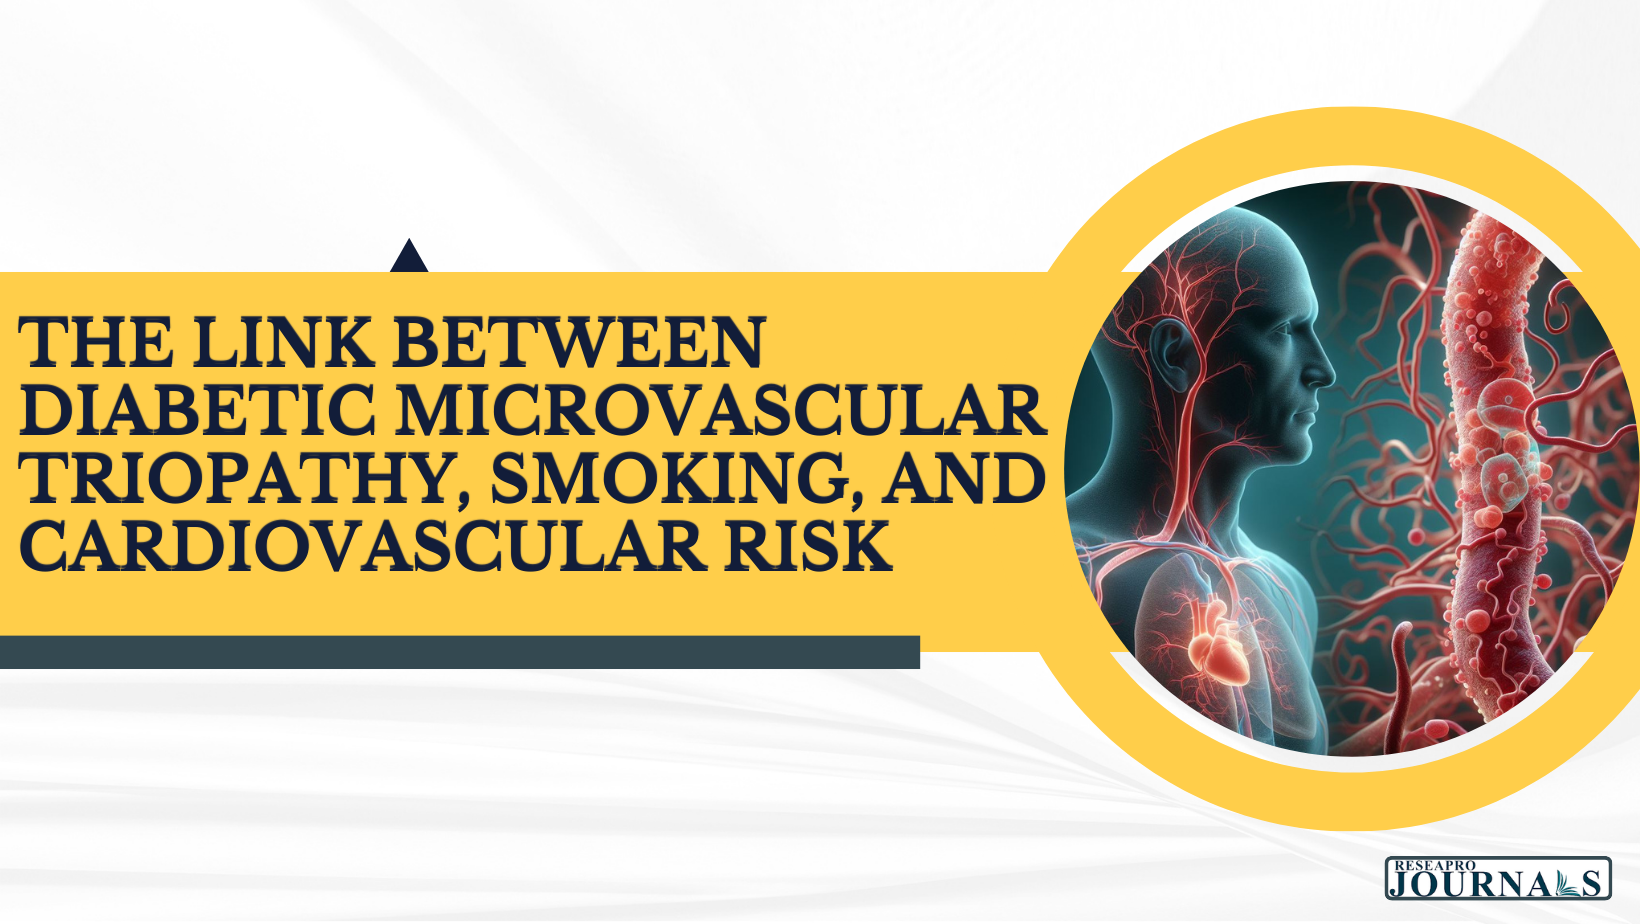 The Link Between Diabetic Microvascular Triopathy, Smoking, and Cardiovascular Risk